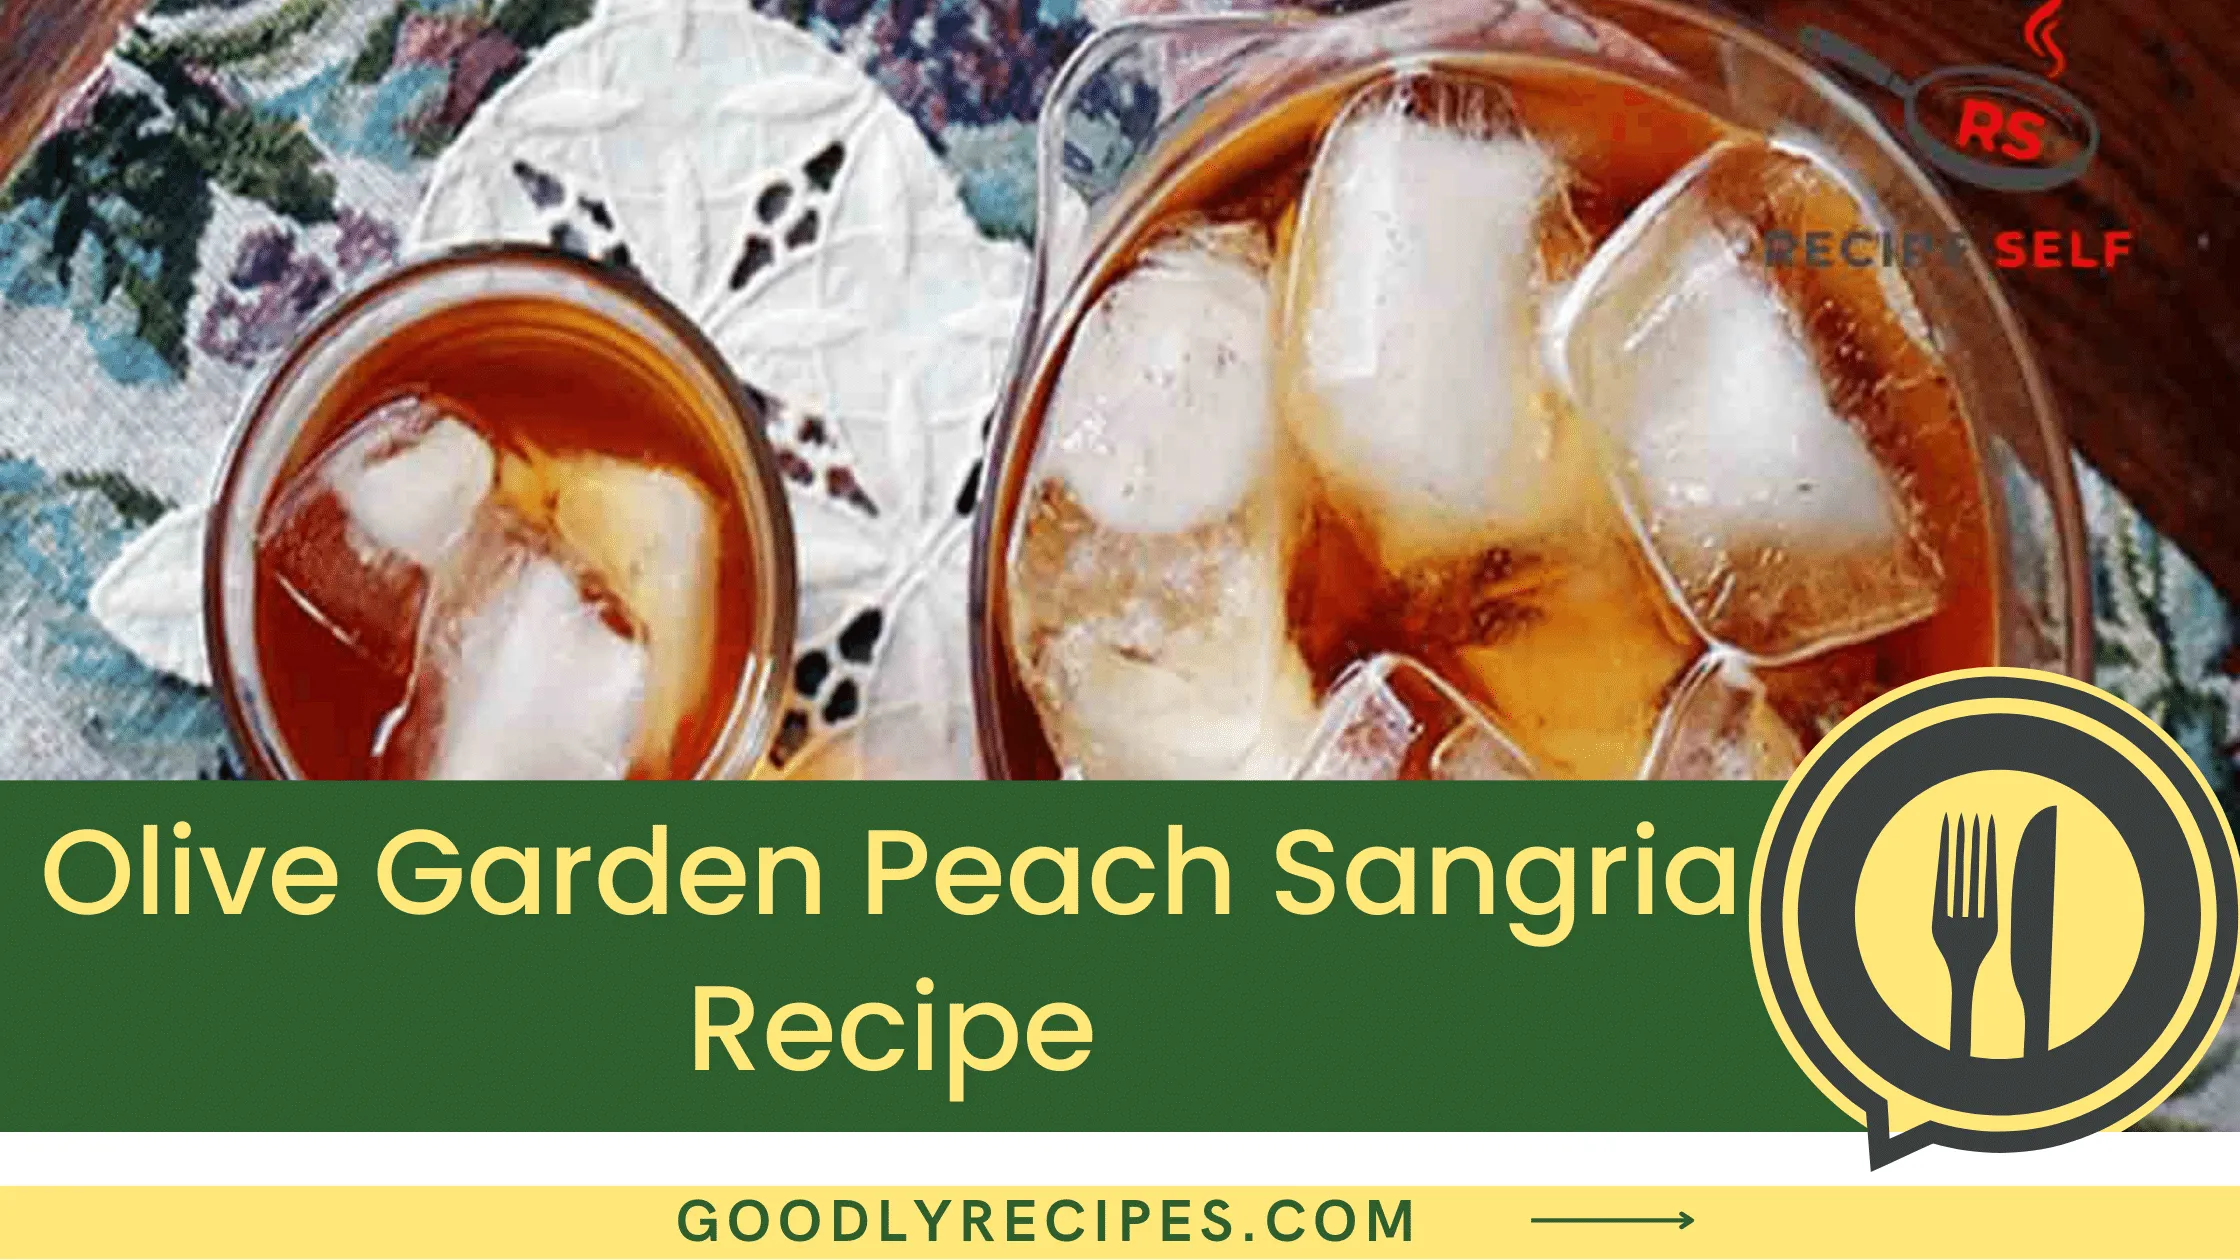 Olive Garden Peach Sangria Recipe - For Food Lovers